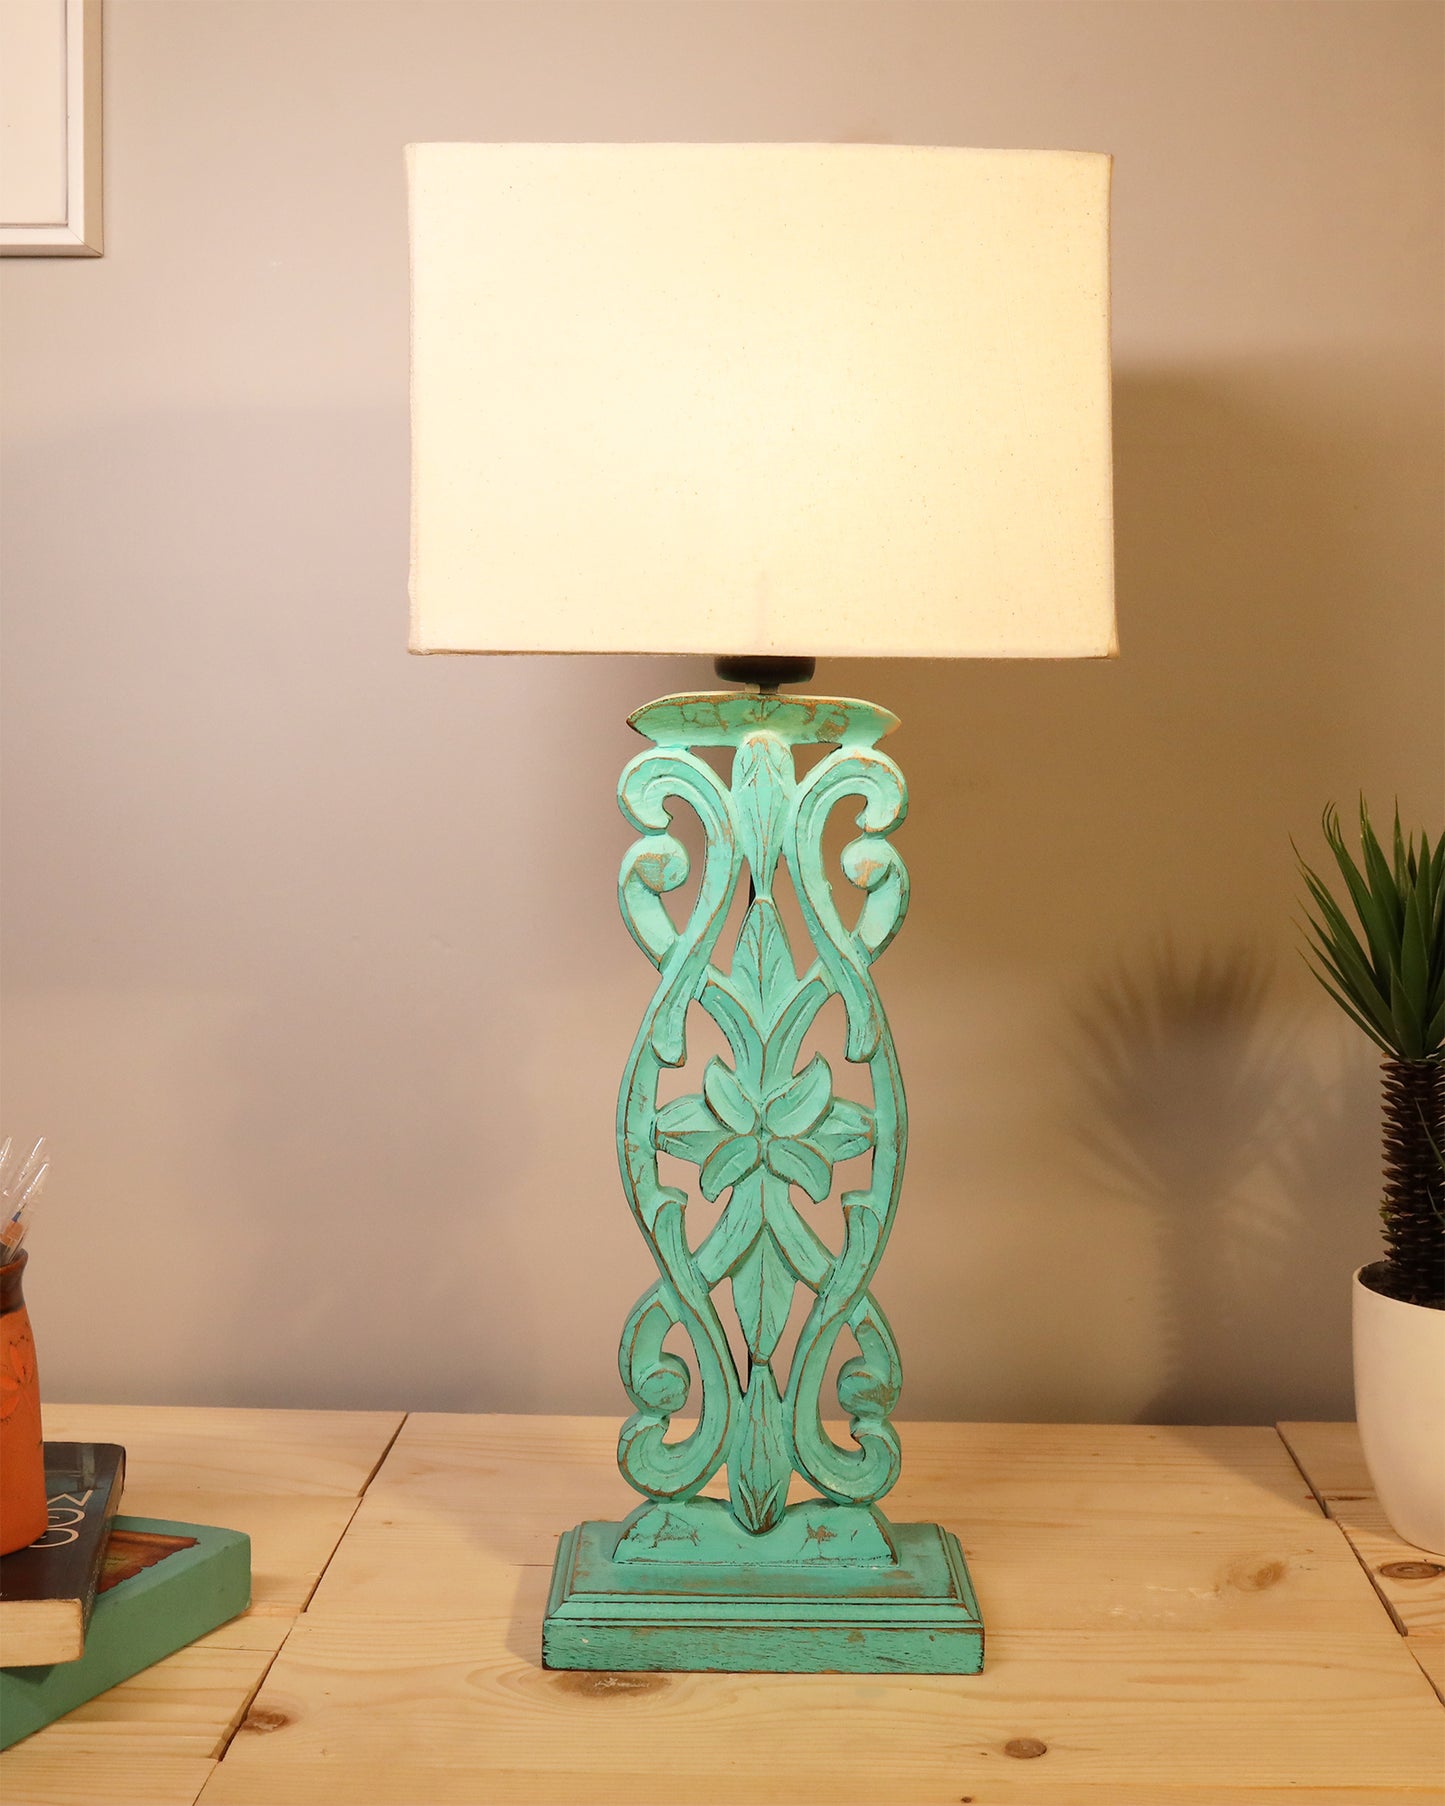 Sculptural Hand Carved Wood Table Lamp with Khadi Square shade